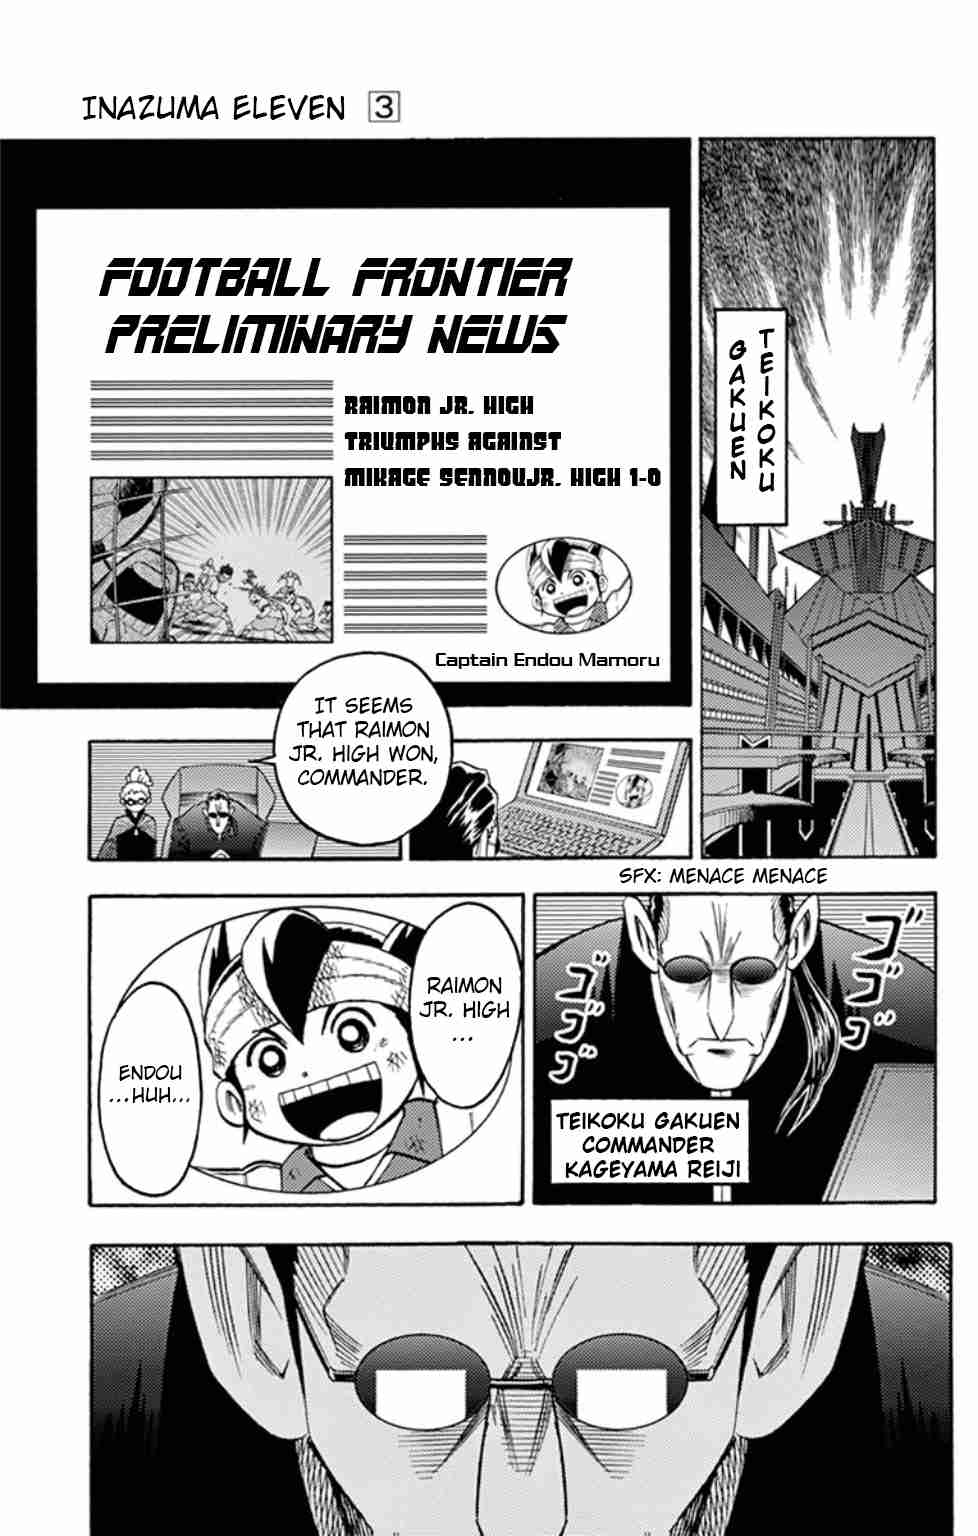 Inazuma Eleven Vol. 3 Ch. 12 Obsession to the path of victory!